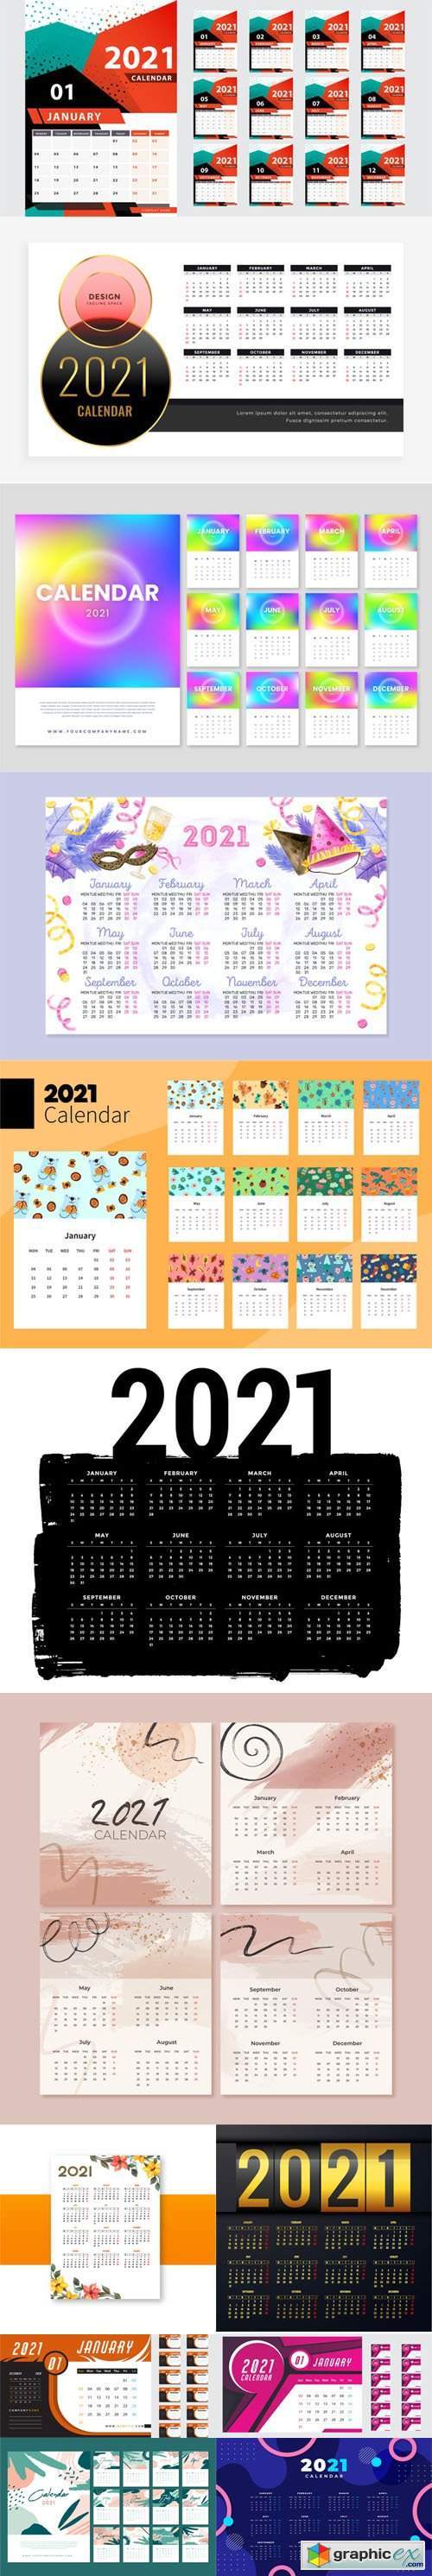 13 New Year 2021 Calendars Templates in Vector